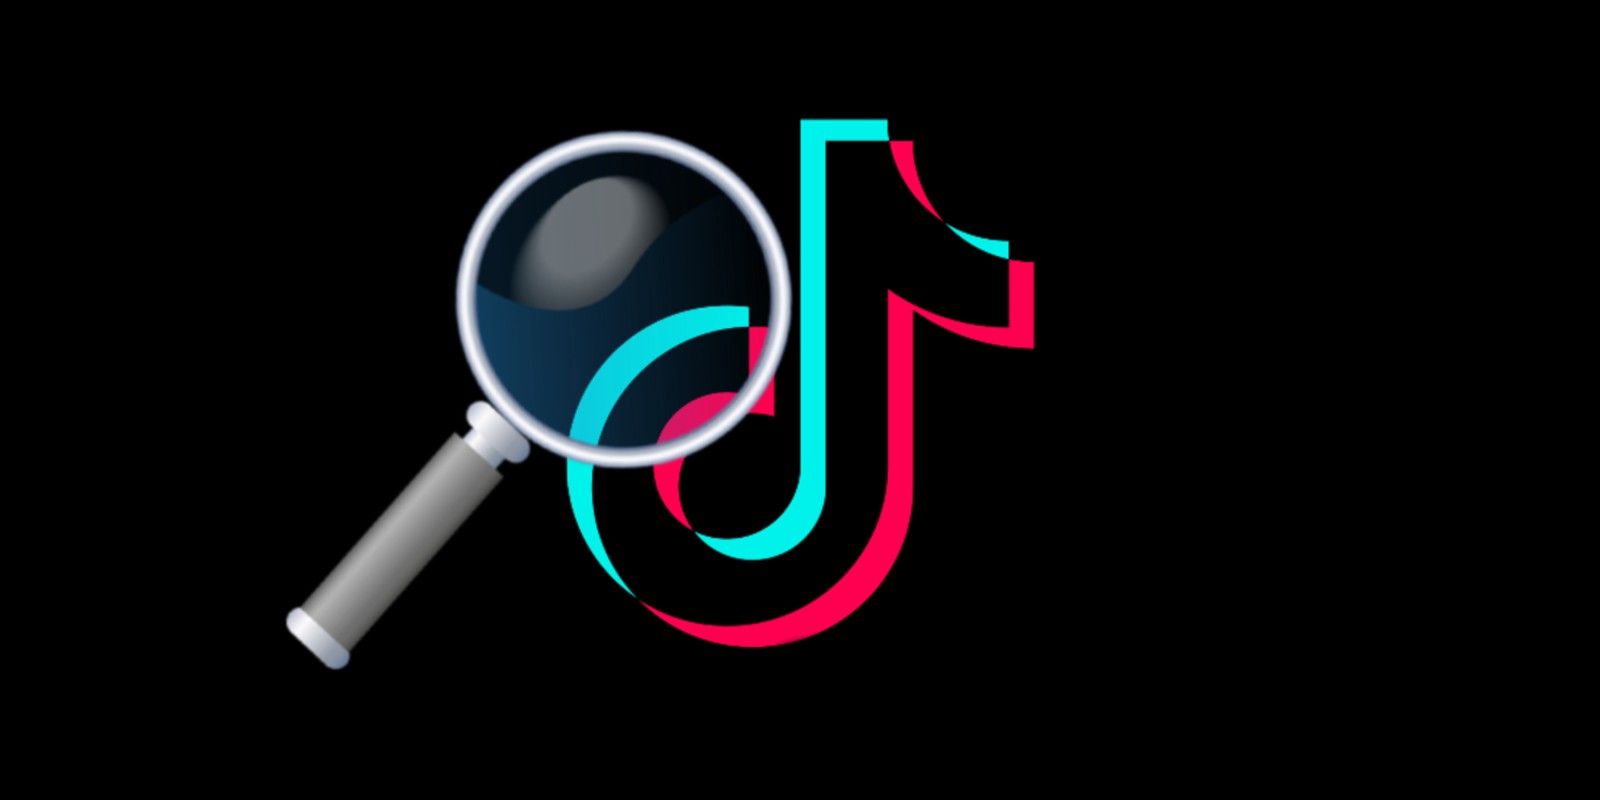 TikTok Invalid Parameters: What The Error Message Means & Fixes To Try